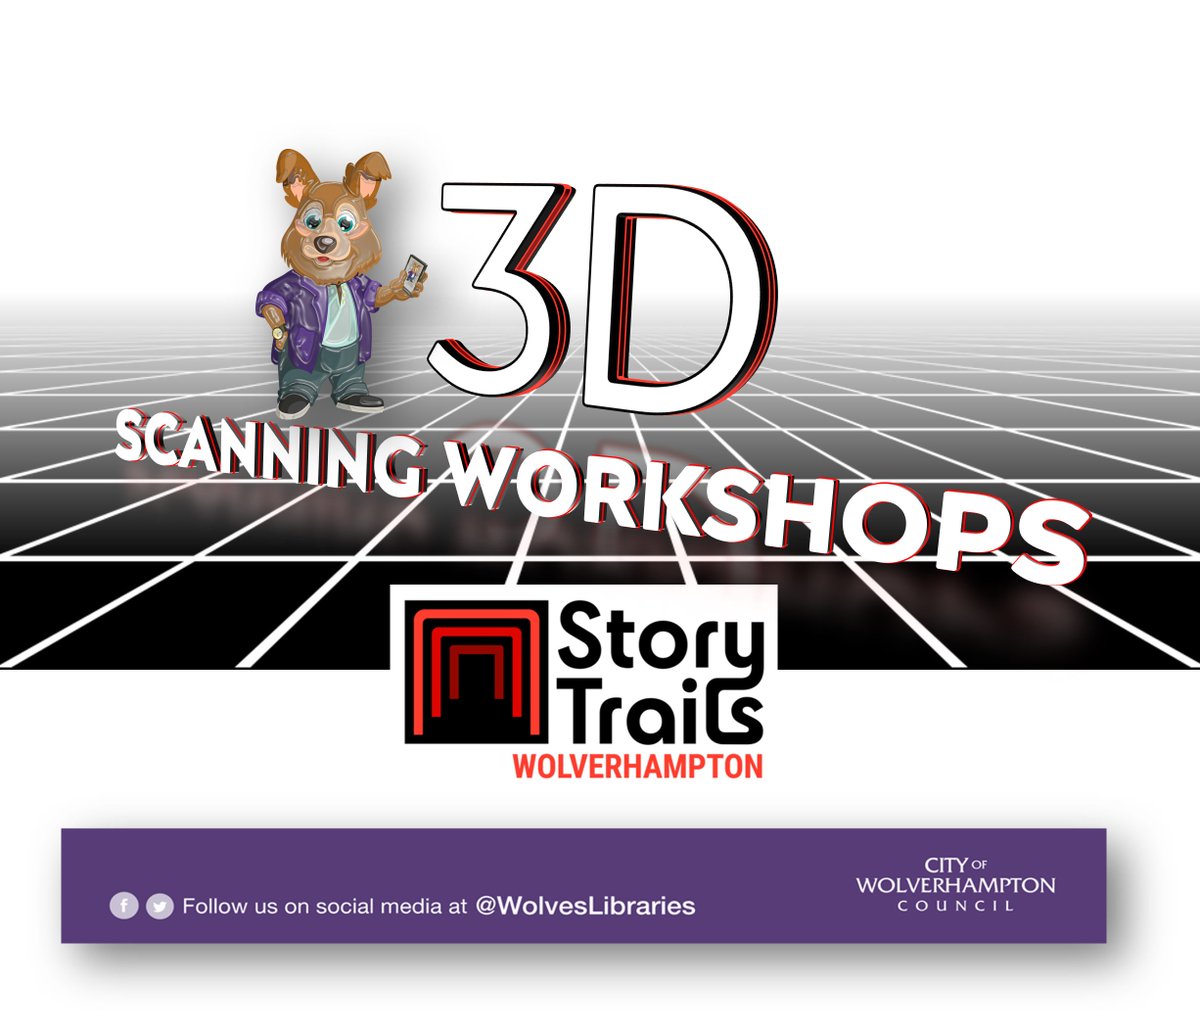 Create a 'big me, little me' to take home using #StoryTrails technology with our 3D Scanning Workshops!

Spaces are limited - please contact branch libraries to book!

Suitable for ages 6+